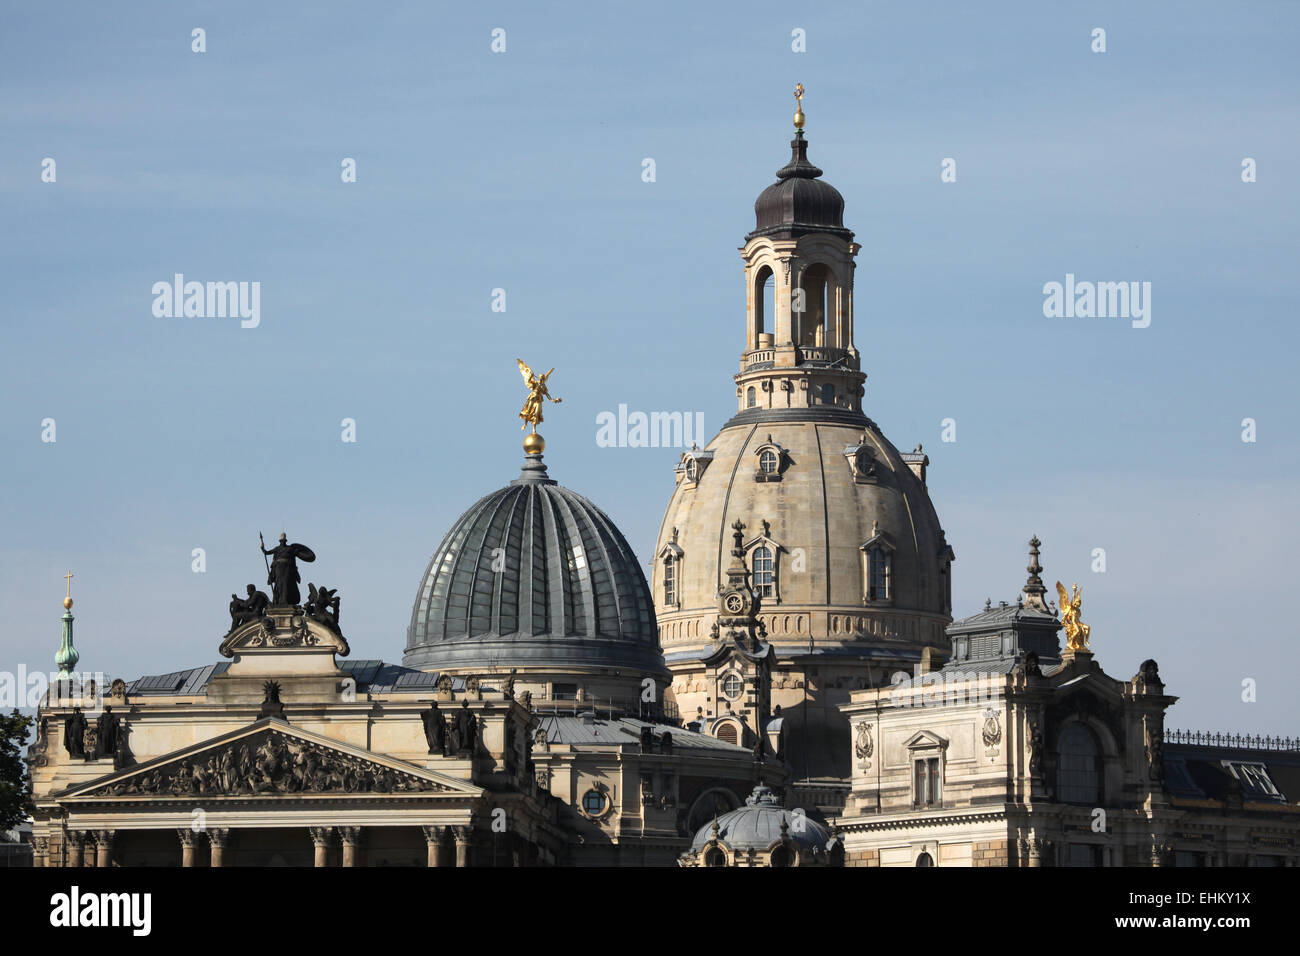 Domes of the Church of Our Lady (Frauenkirche) and the Academy of Fine Arts in Dresden, Saxony, Germany. Stock Photo